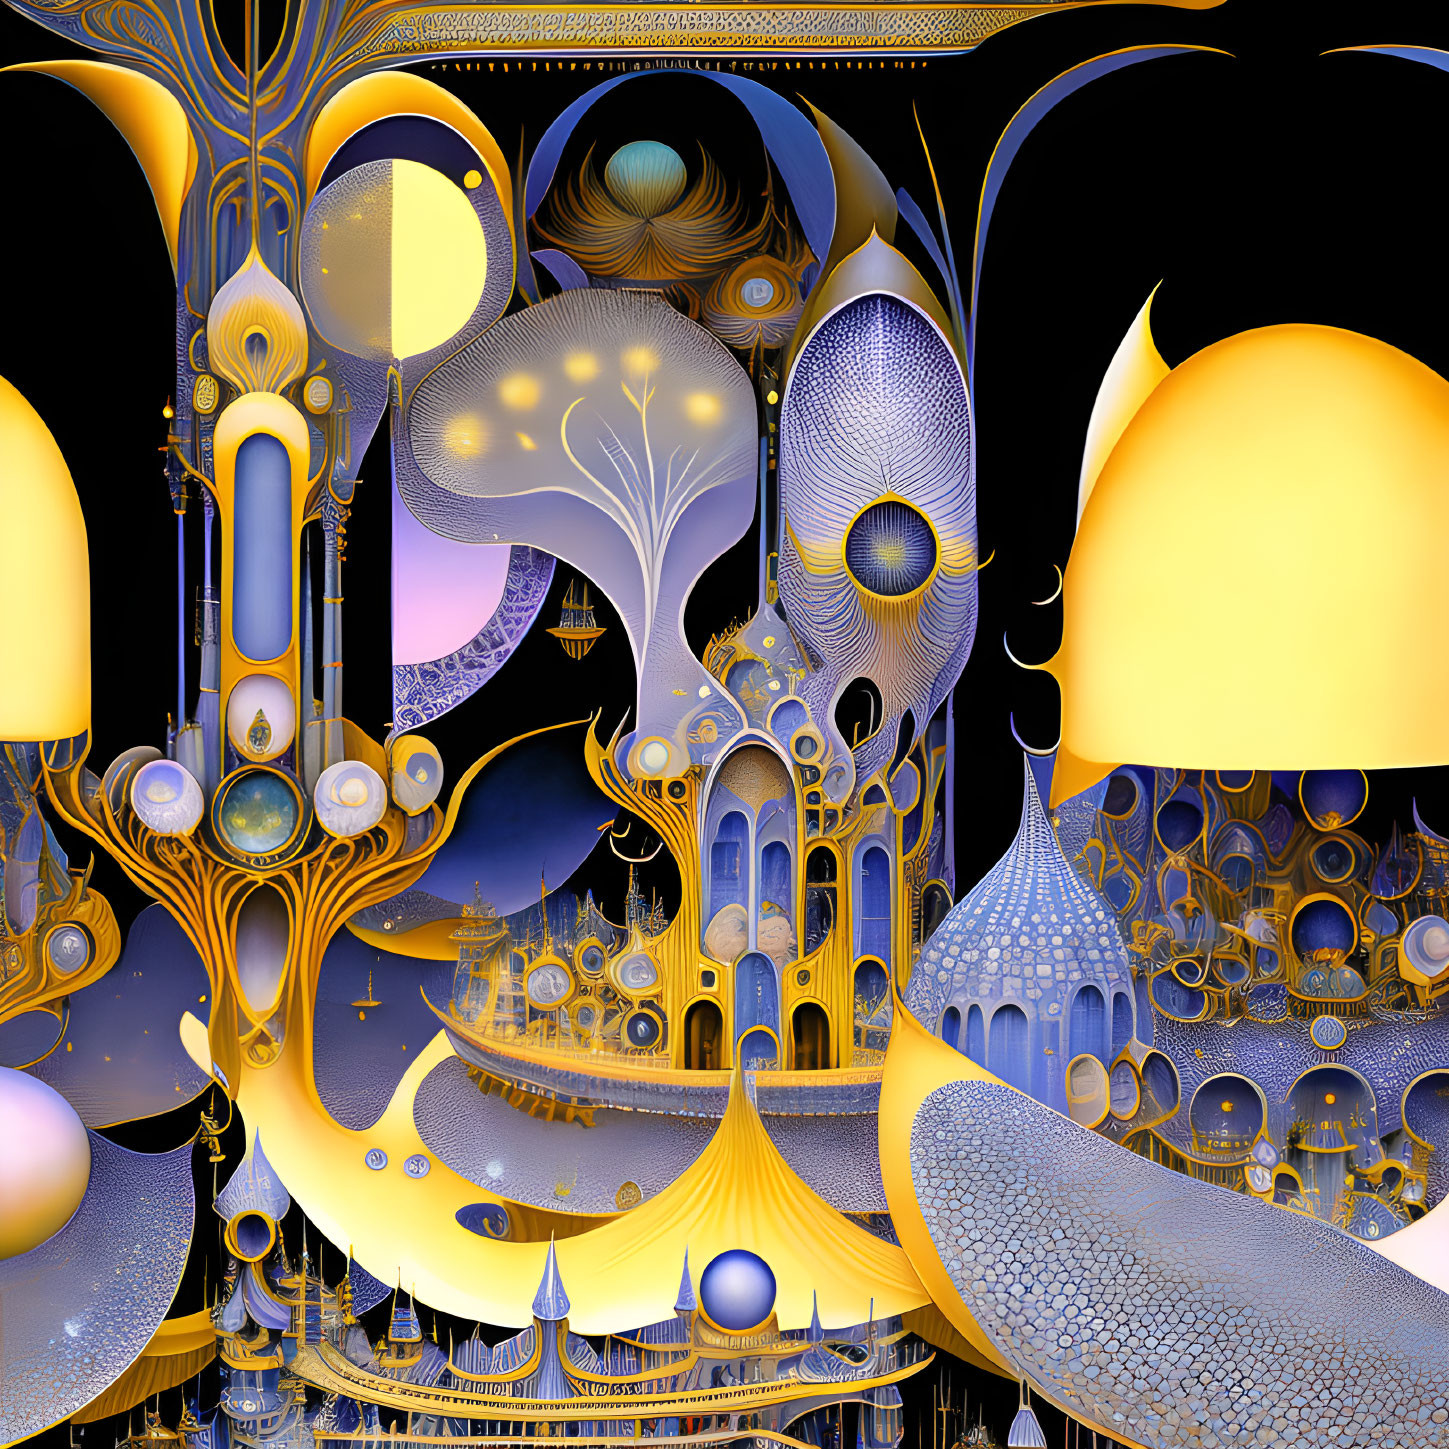 Intricate Gold and Blue Fractal Image with Abstract Architecture